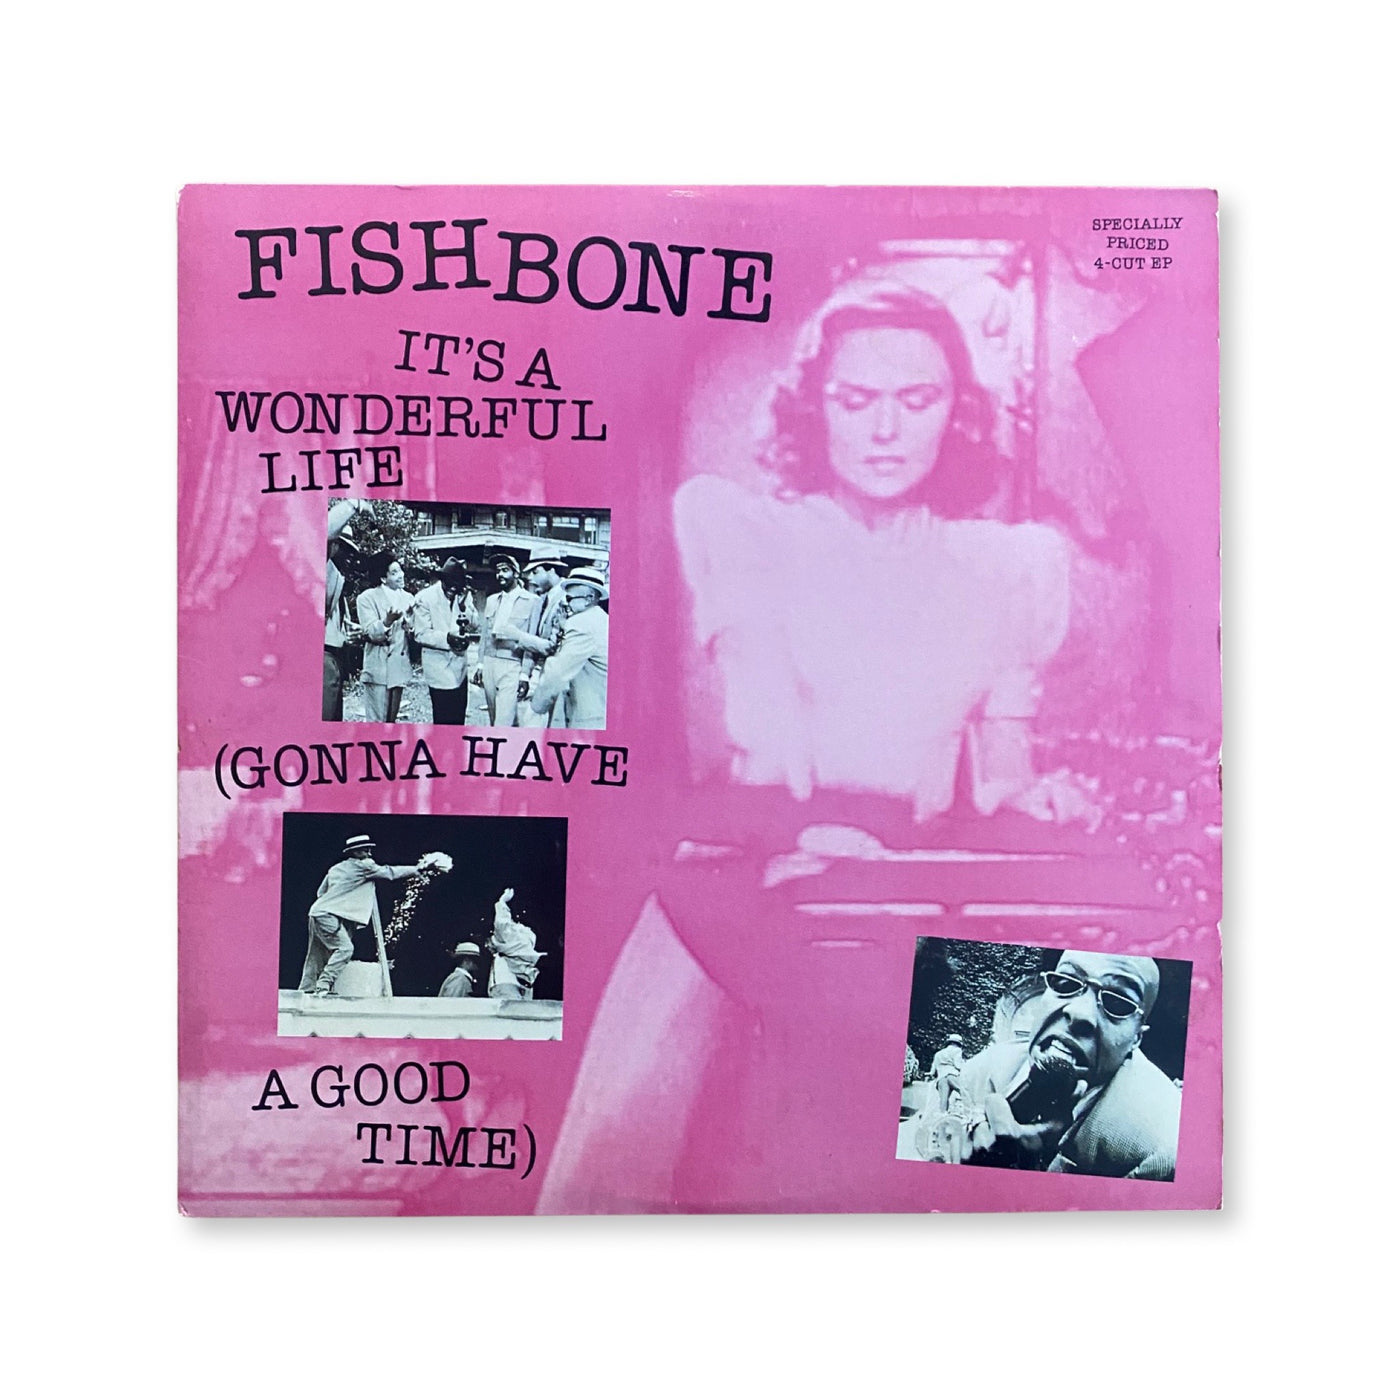 Fishbone - It's A Wonderful Life (Gonna Have A Good Time)